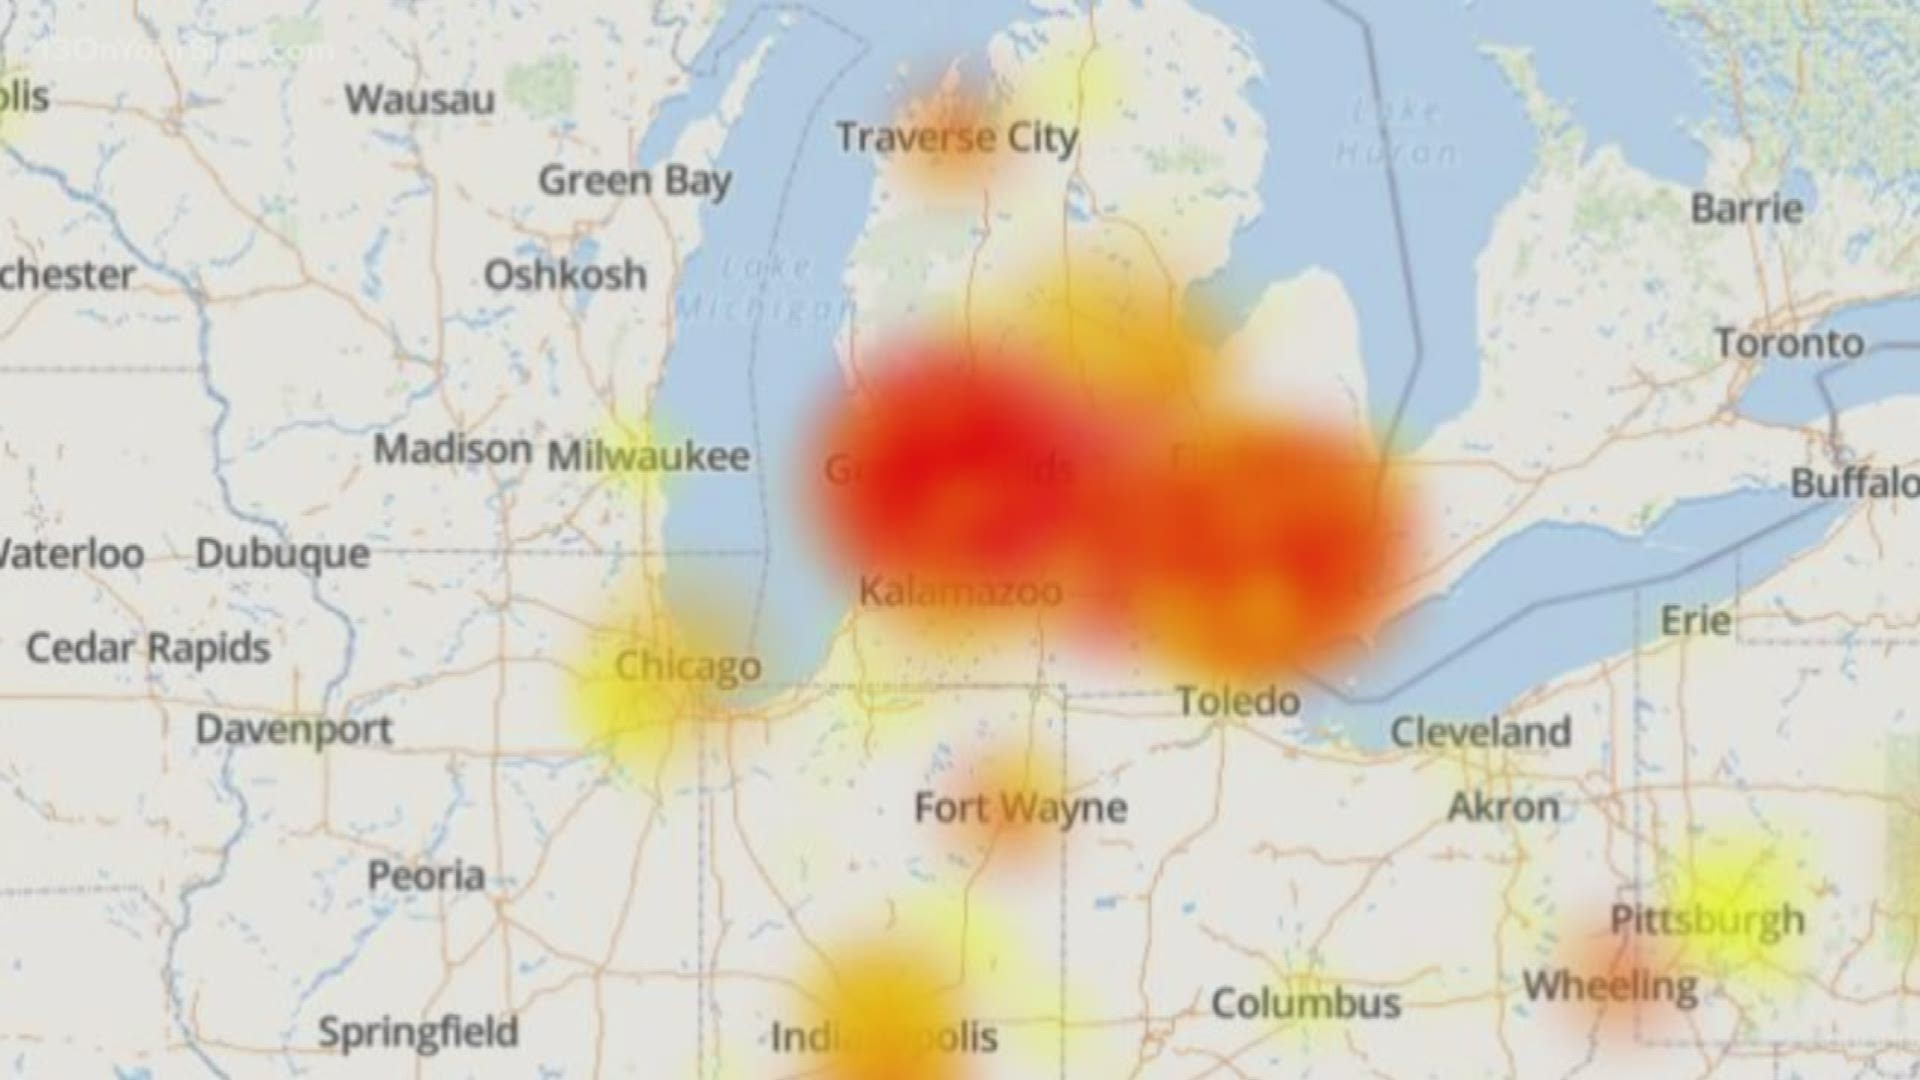 Verizon Wireless customers experiencing outages, including Grand Rapids